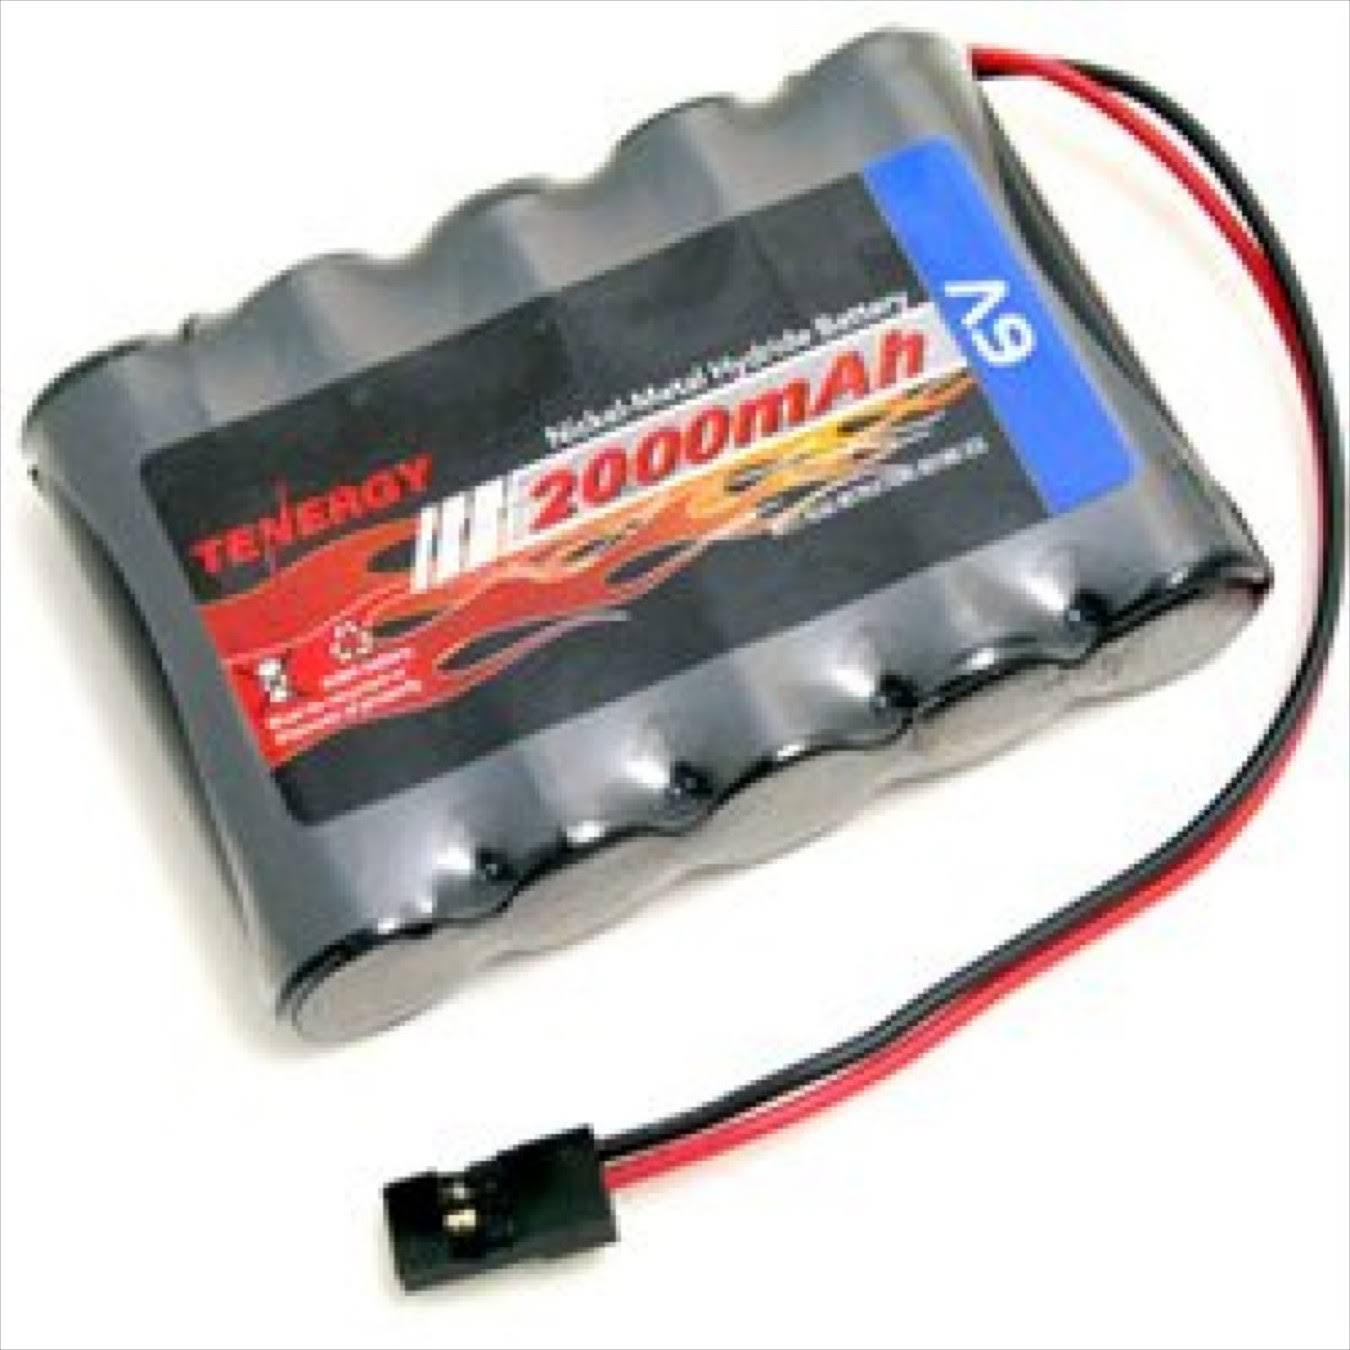 Tenergy NiMH 6V 2000mAh Side-by-Side Receiver Battery Pack w/ Hitec Connector for RC Aircrafts